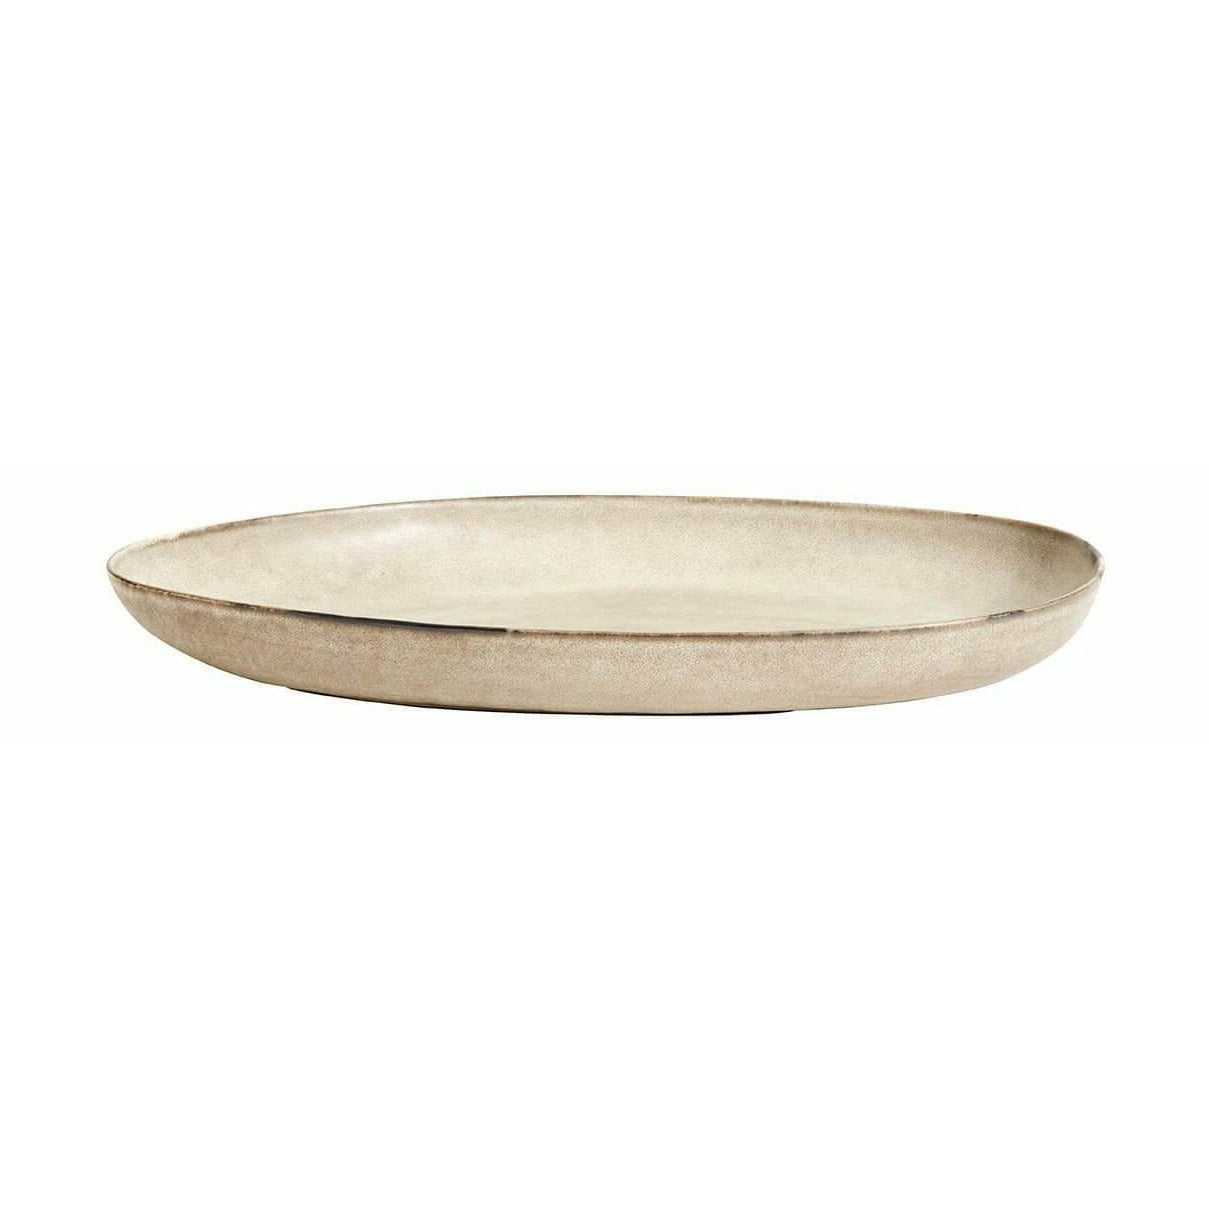 Muubs Mame Serving Plate Oyster, 43 cm